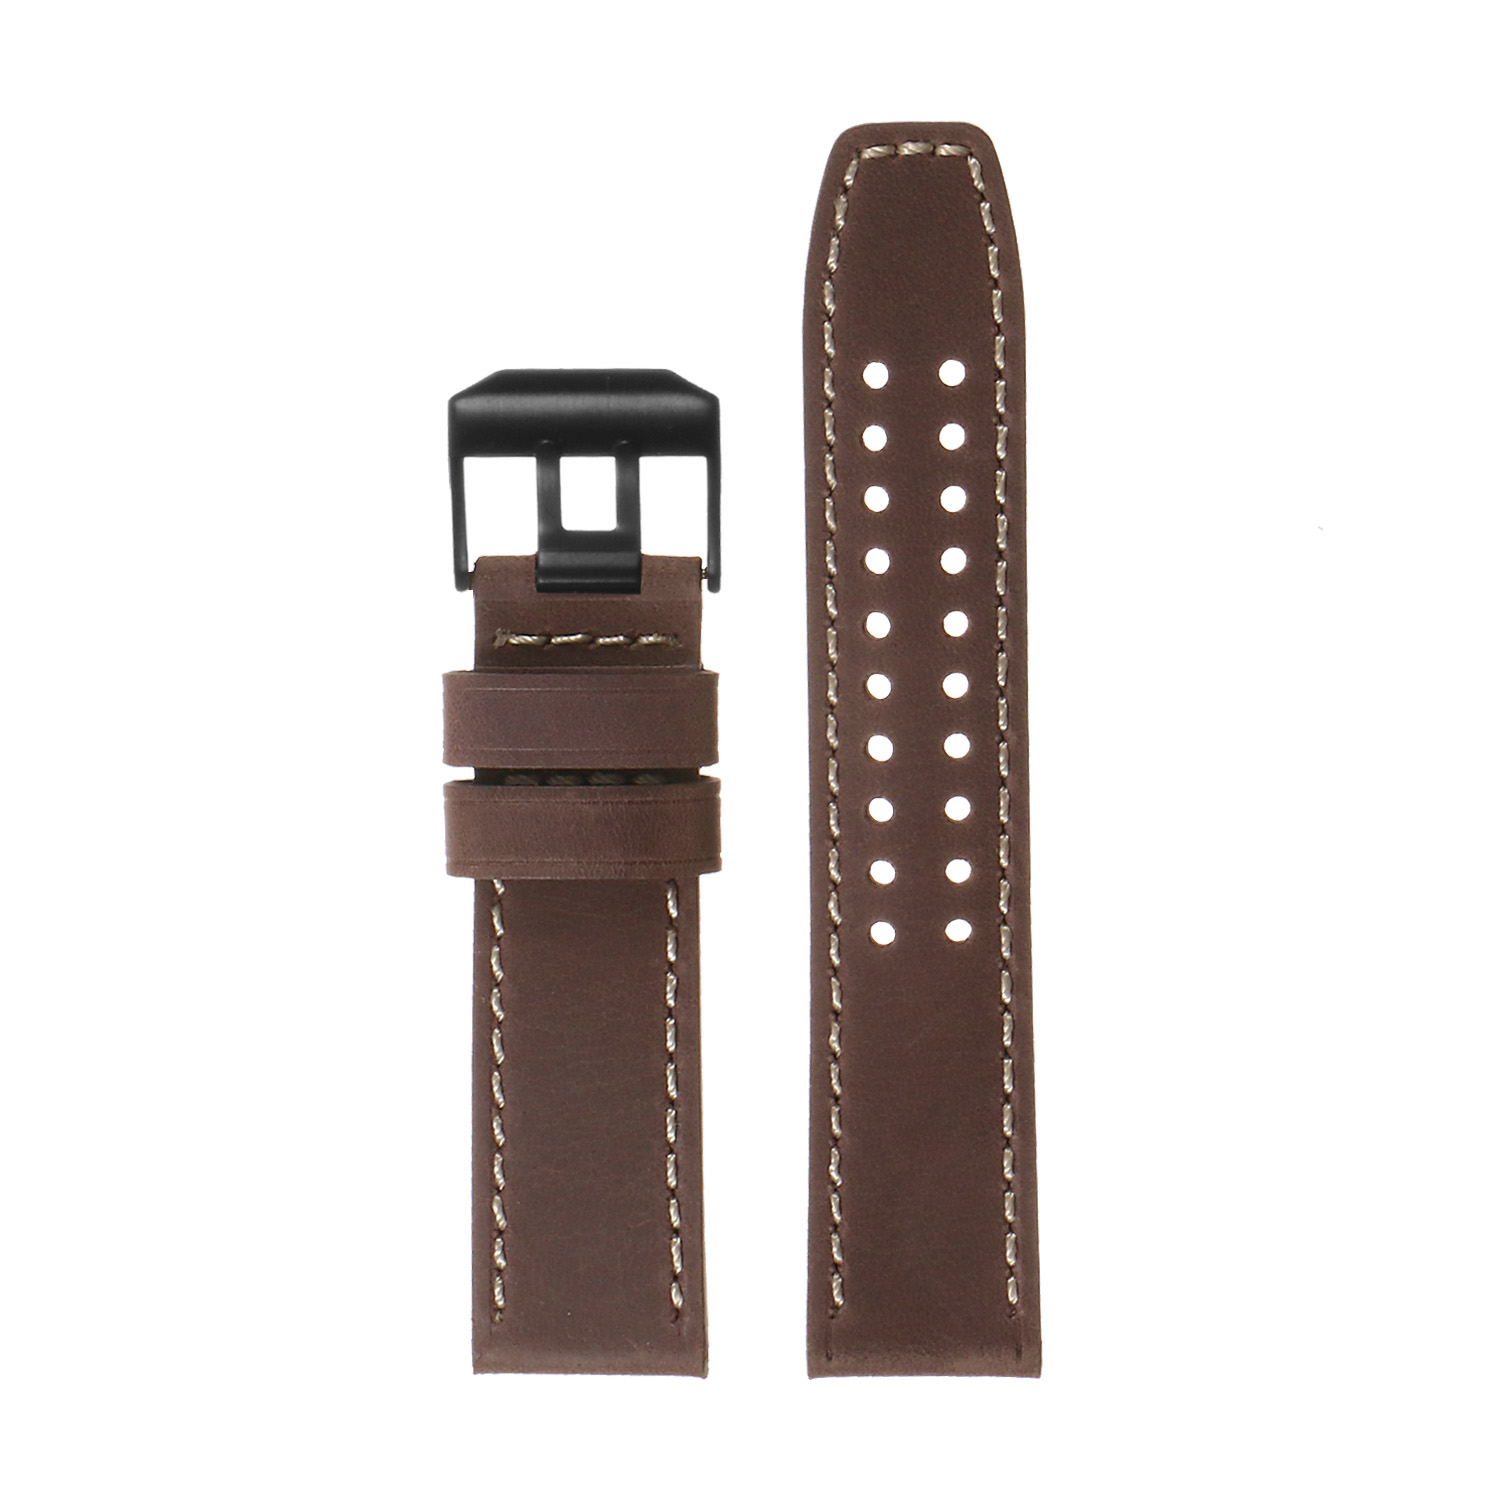 Lmx1.2.mb Vintage Leather Strap In Brown With Matte Black Buckle 3